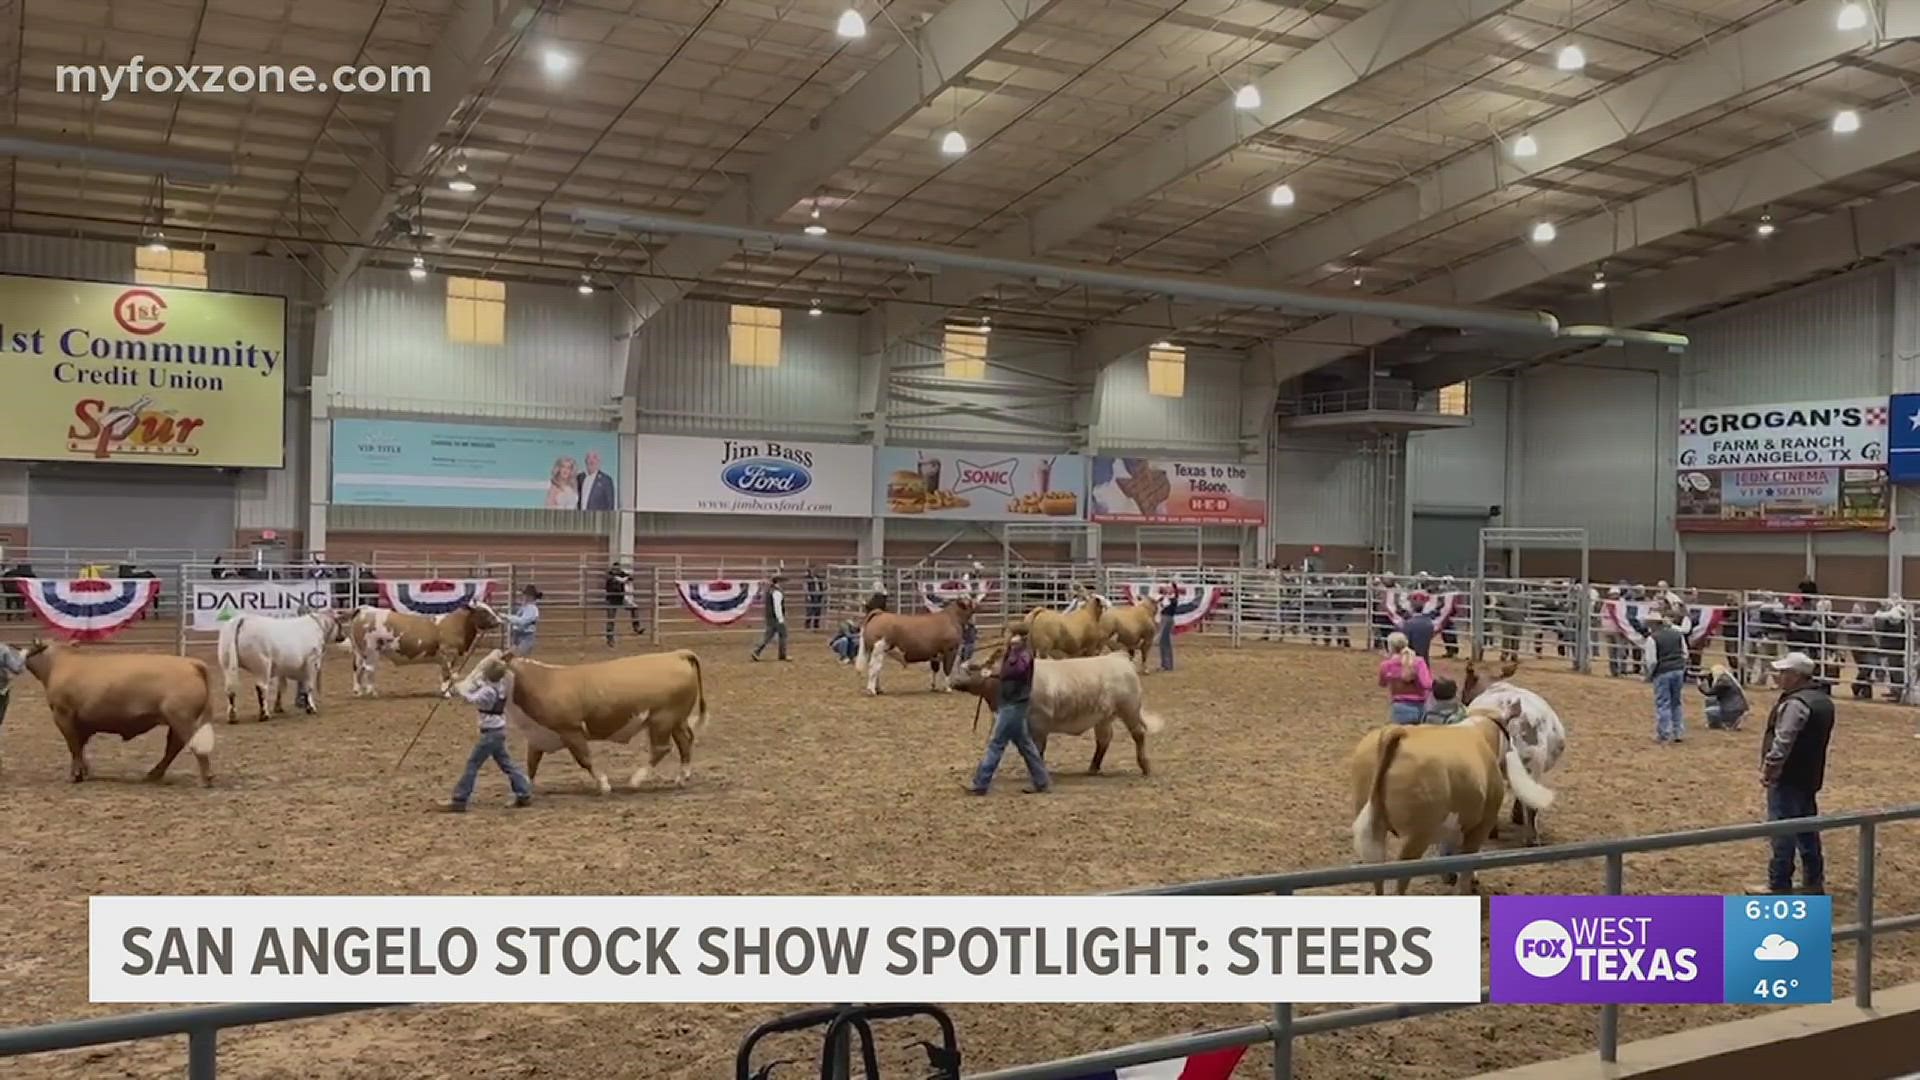 The San Angelo Stock Show had their best steers on display on Tuesday.